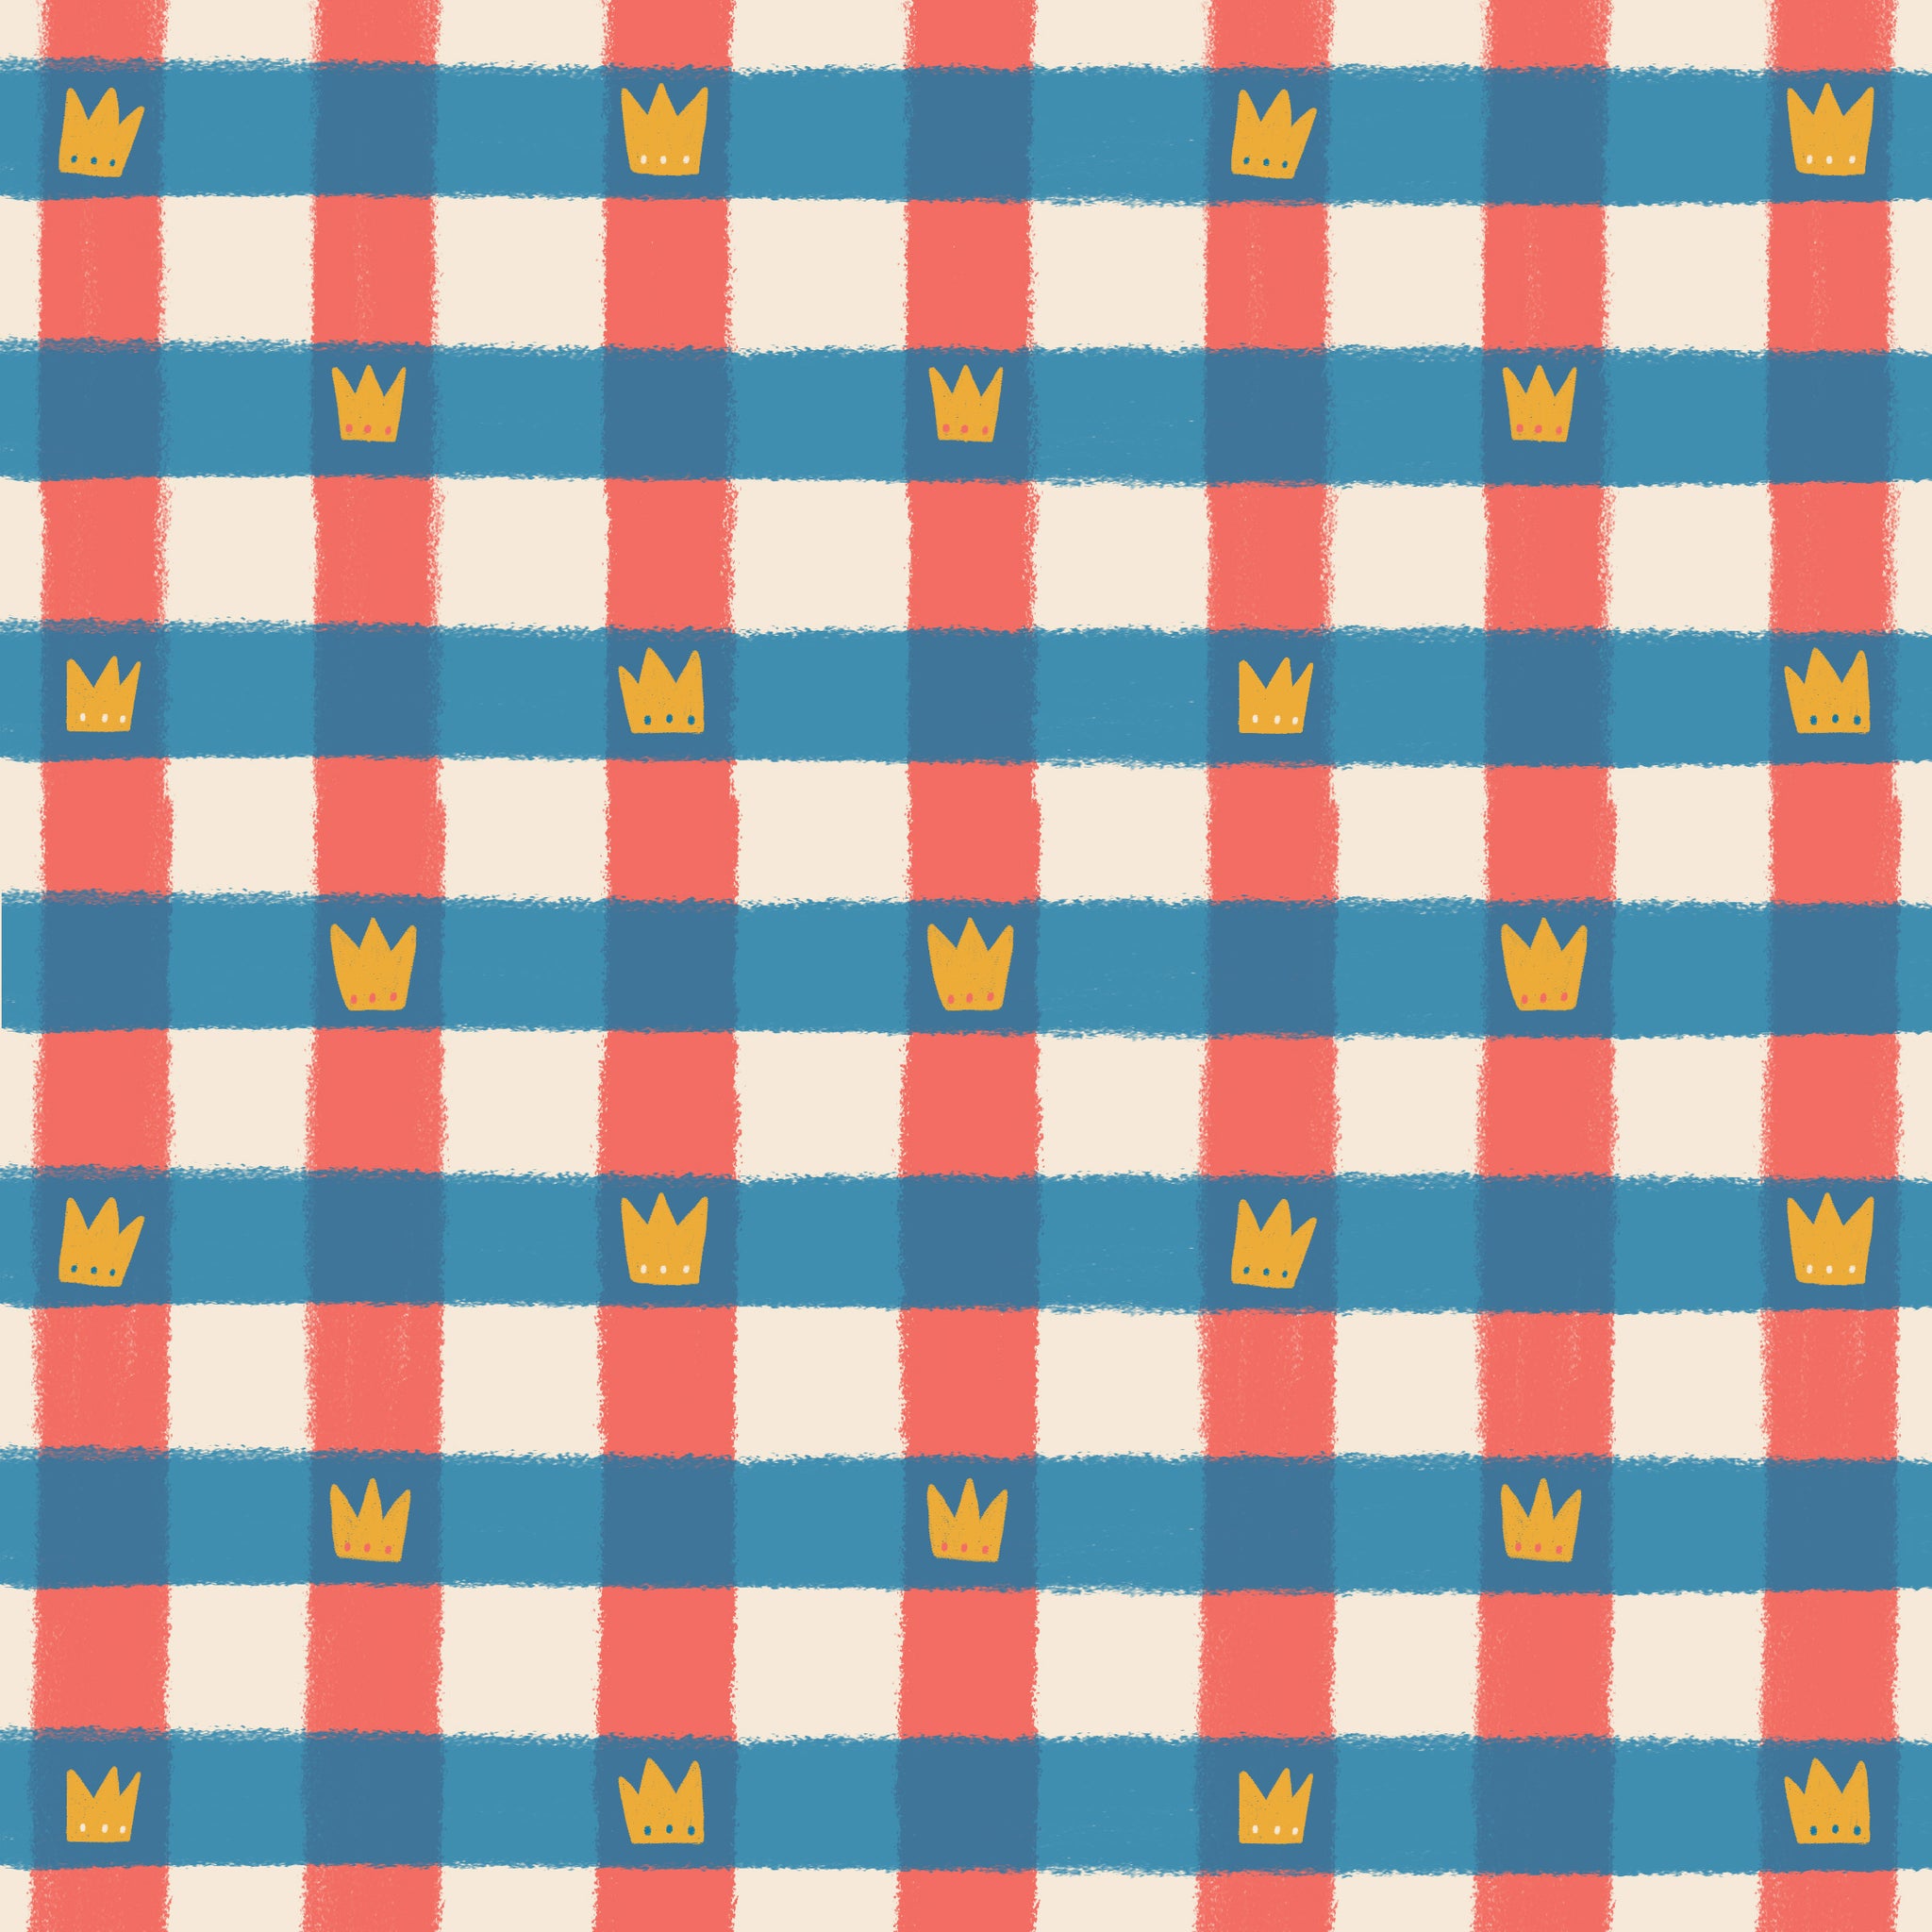 Tablet wallpaper with a classic check and crown illustration details | Raspberry Blossom